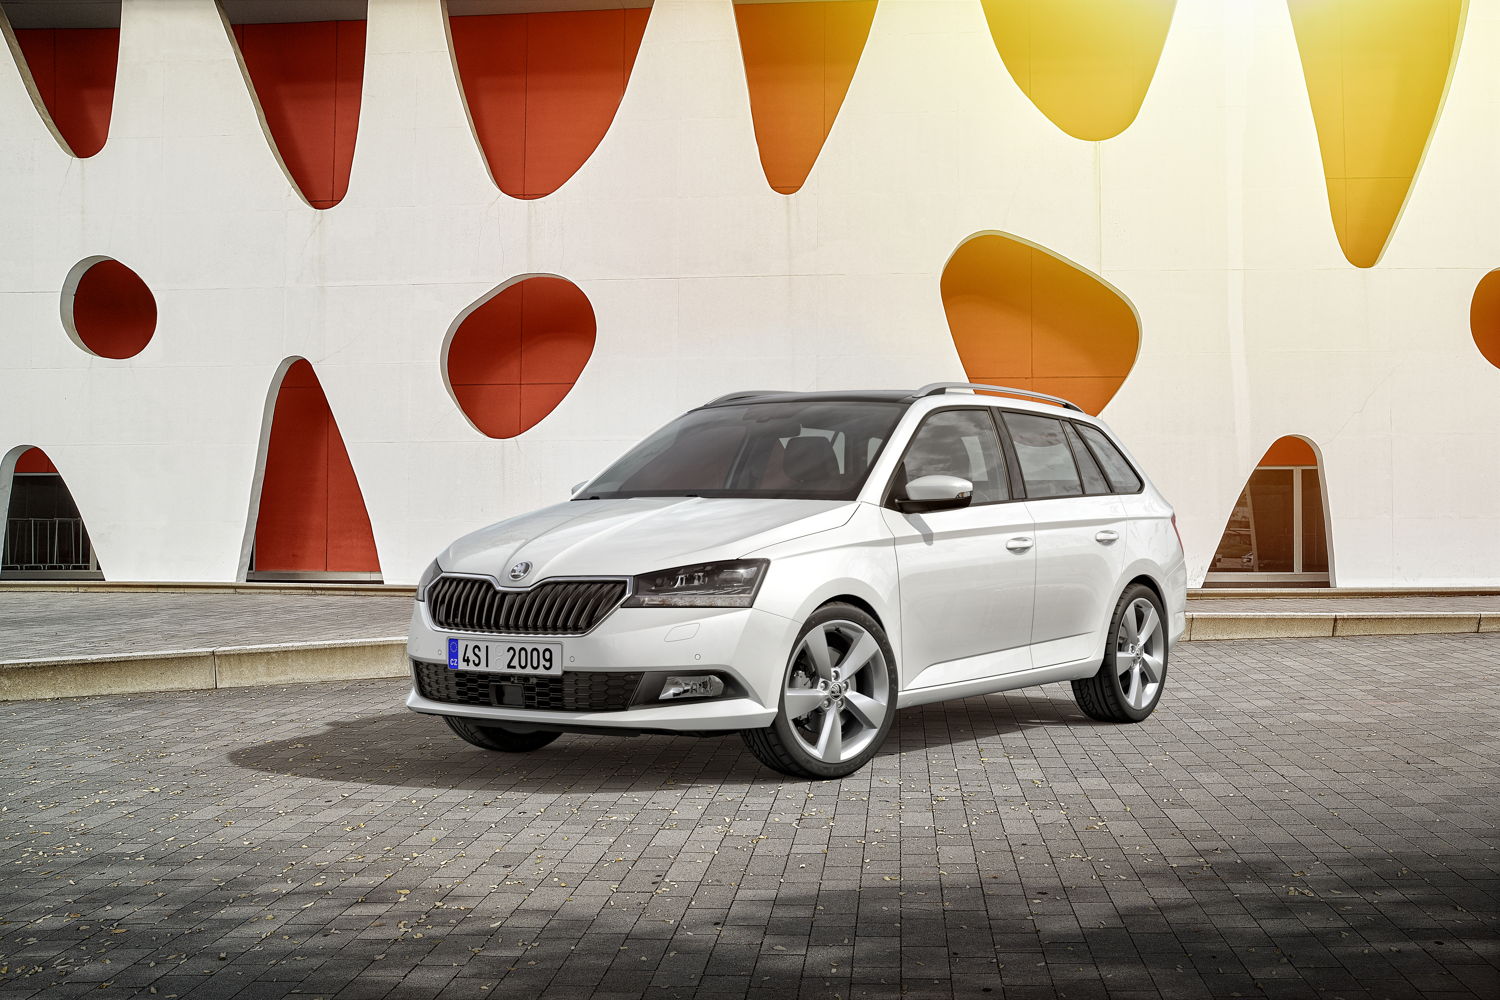 A restyled front end and the state-of-the-art LED headlights accentuate the sophisticated appearance of the ŠKODA FABIA Estate.